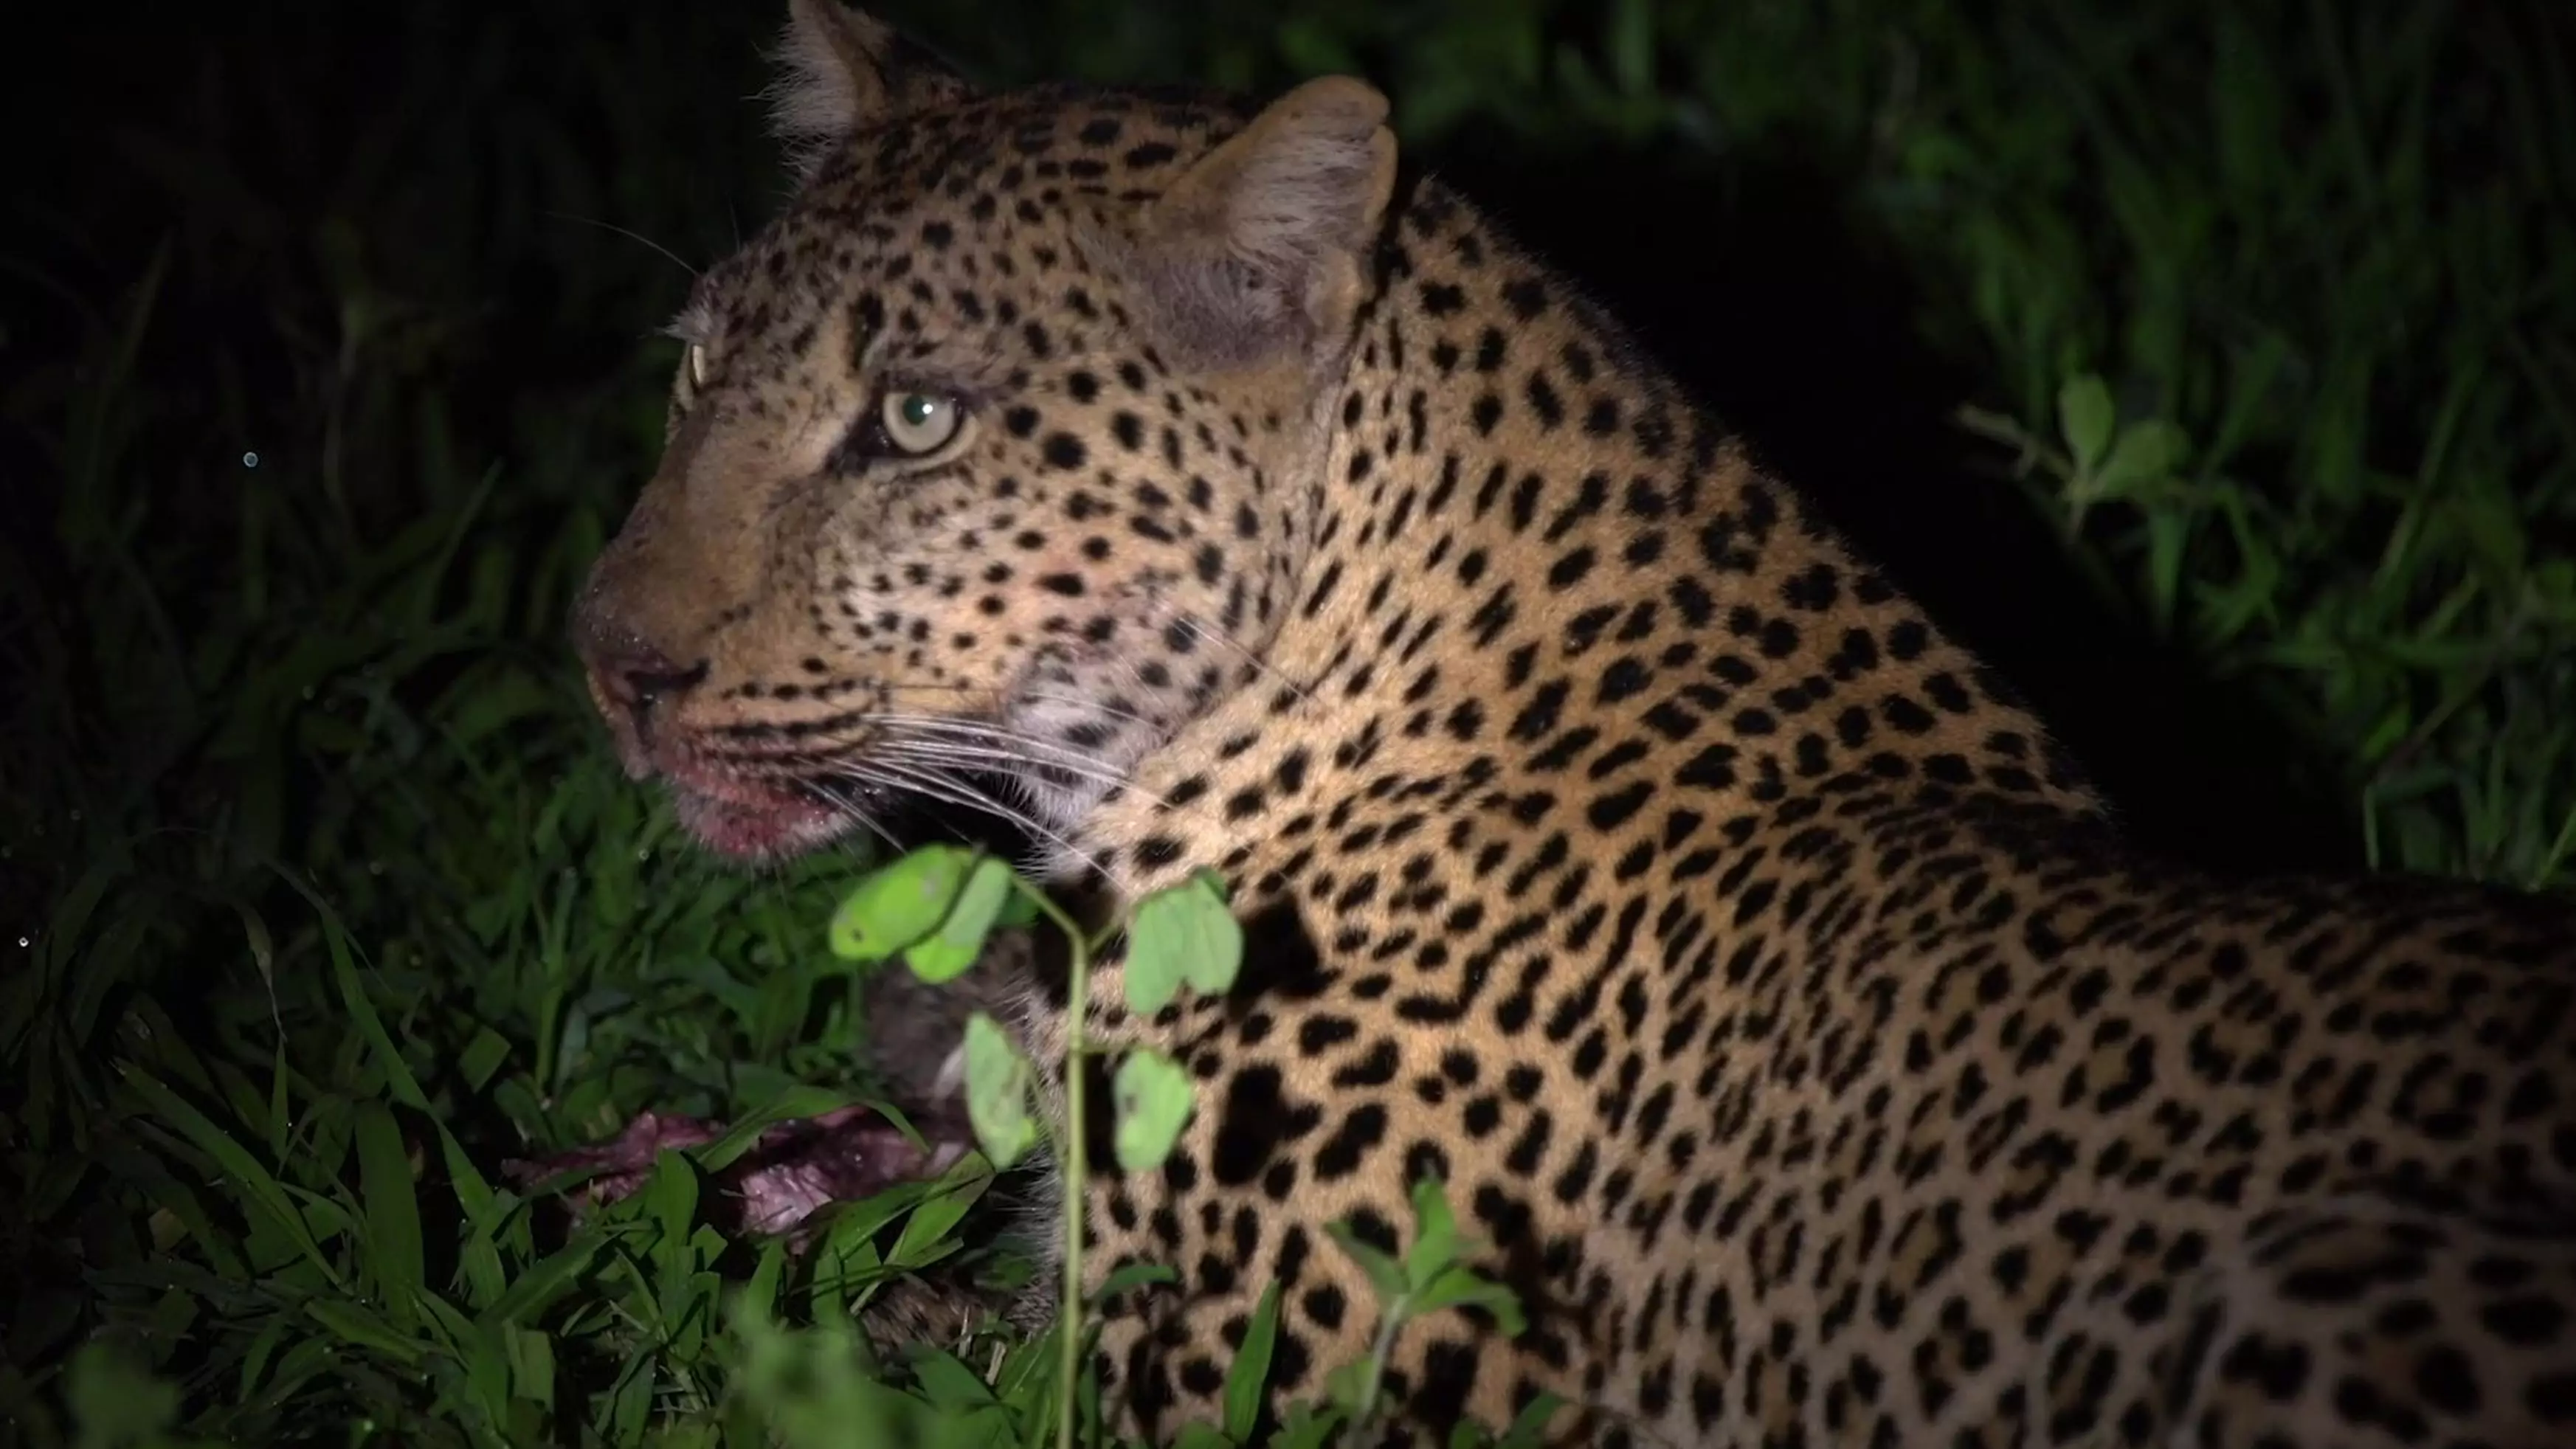 Tense Footage Shows Leopard Stealing Food Out Of Crocodile's Mouth